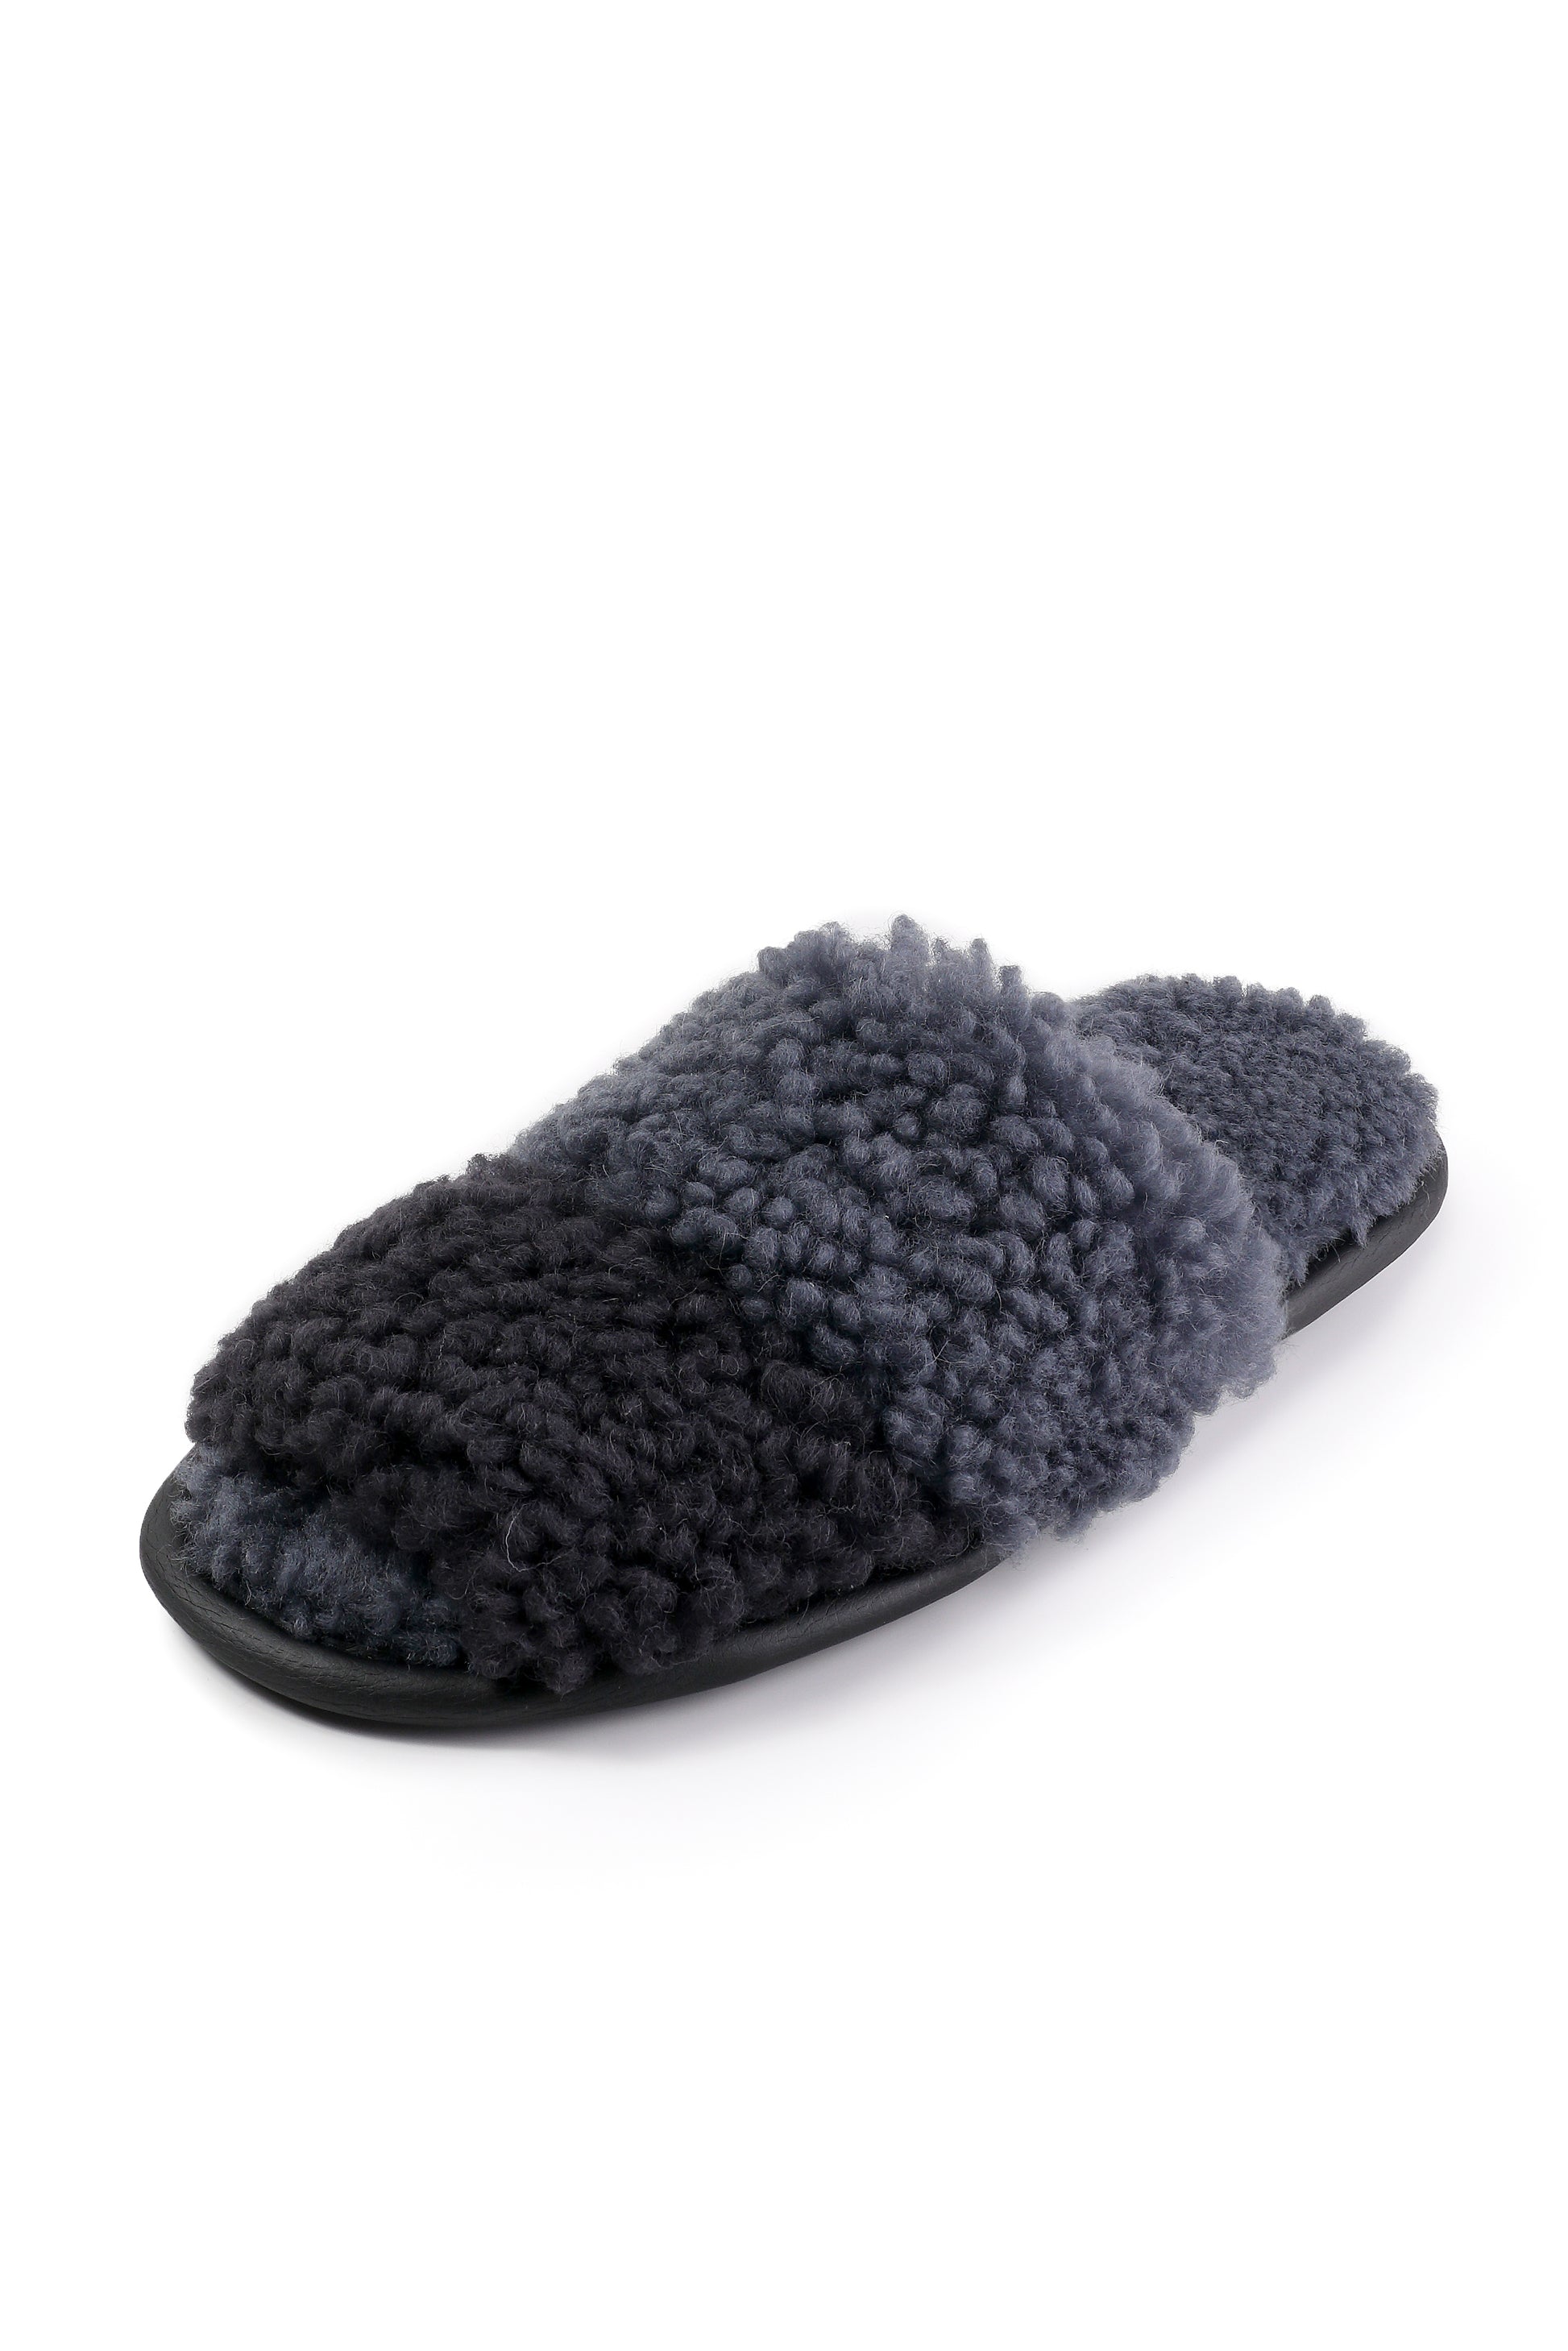 Soft Sheepskin Slippers with Grey Fur Lining in Black & Grey Color